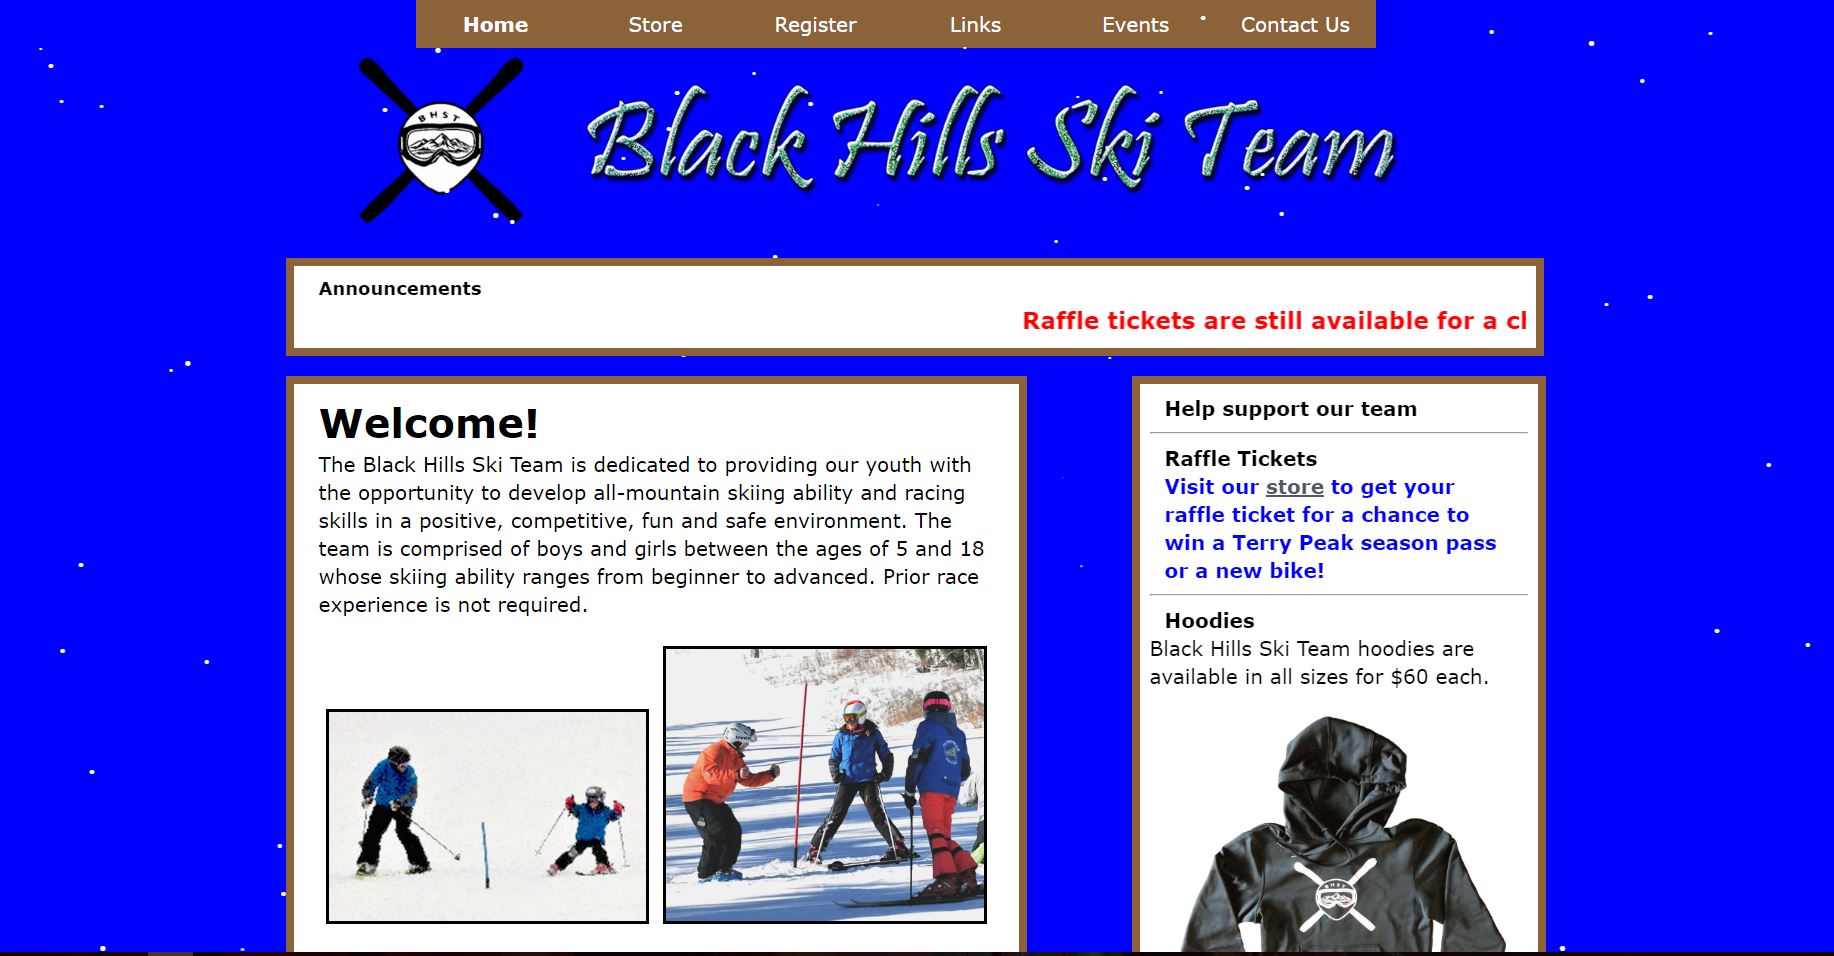 The first version of the website that I created for the Black Hills Ski Team